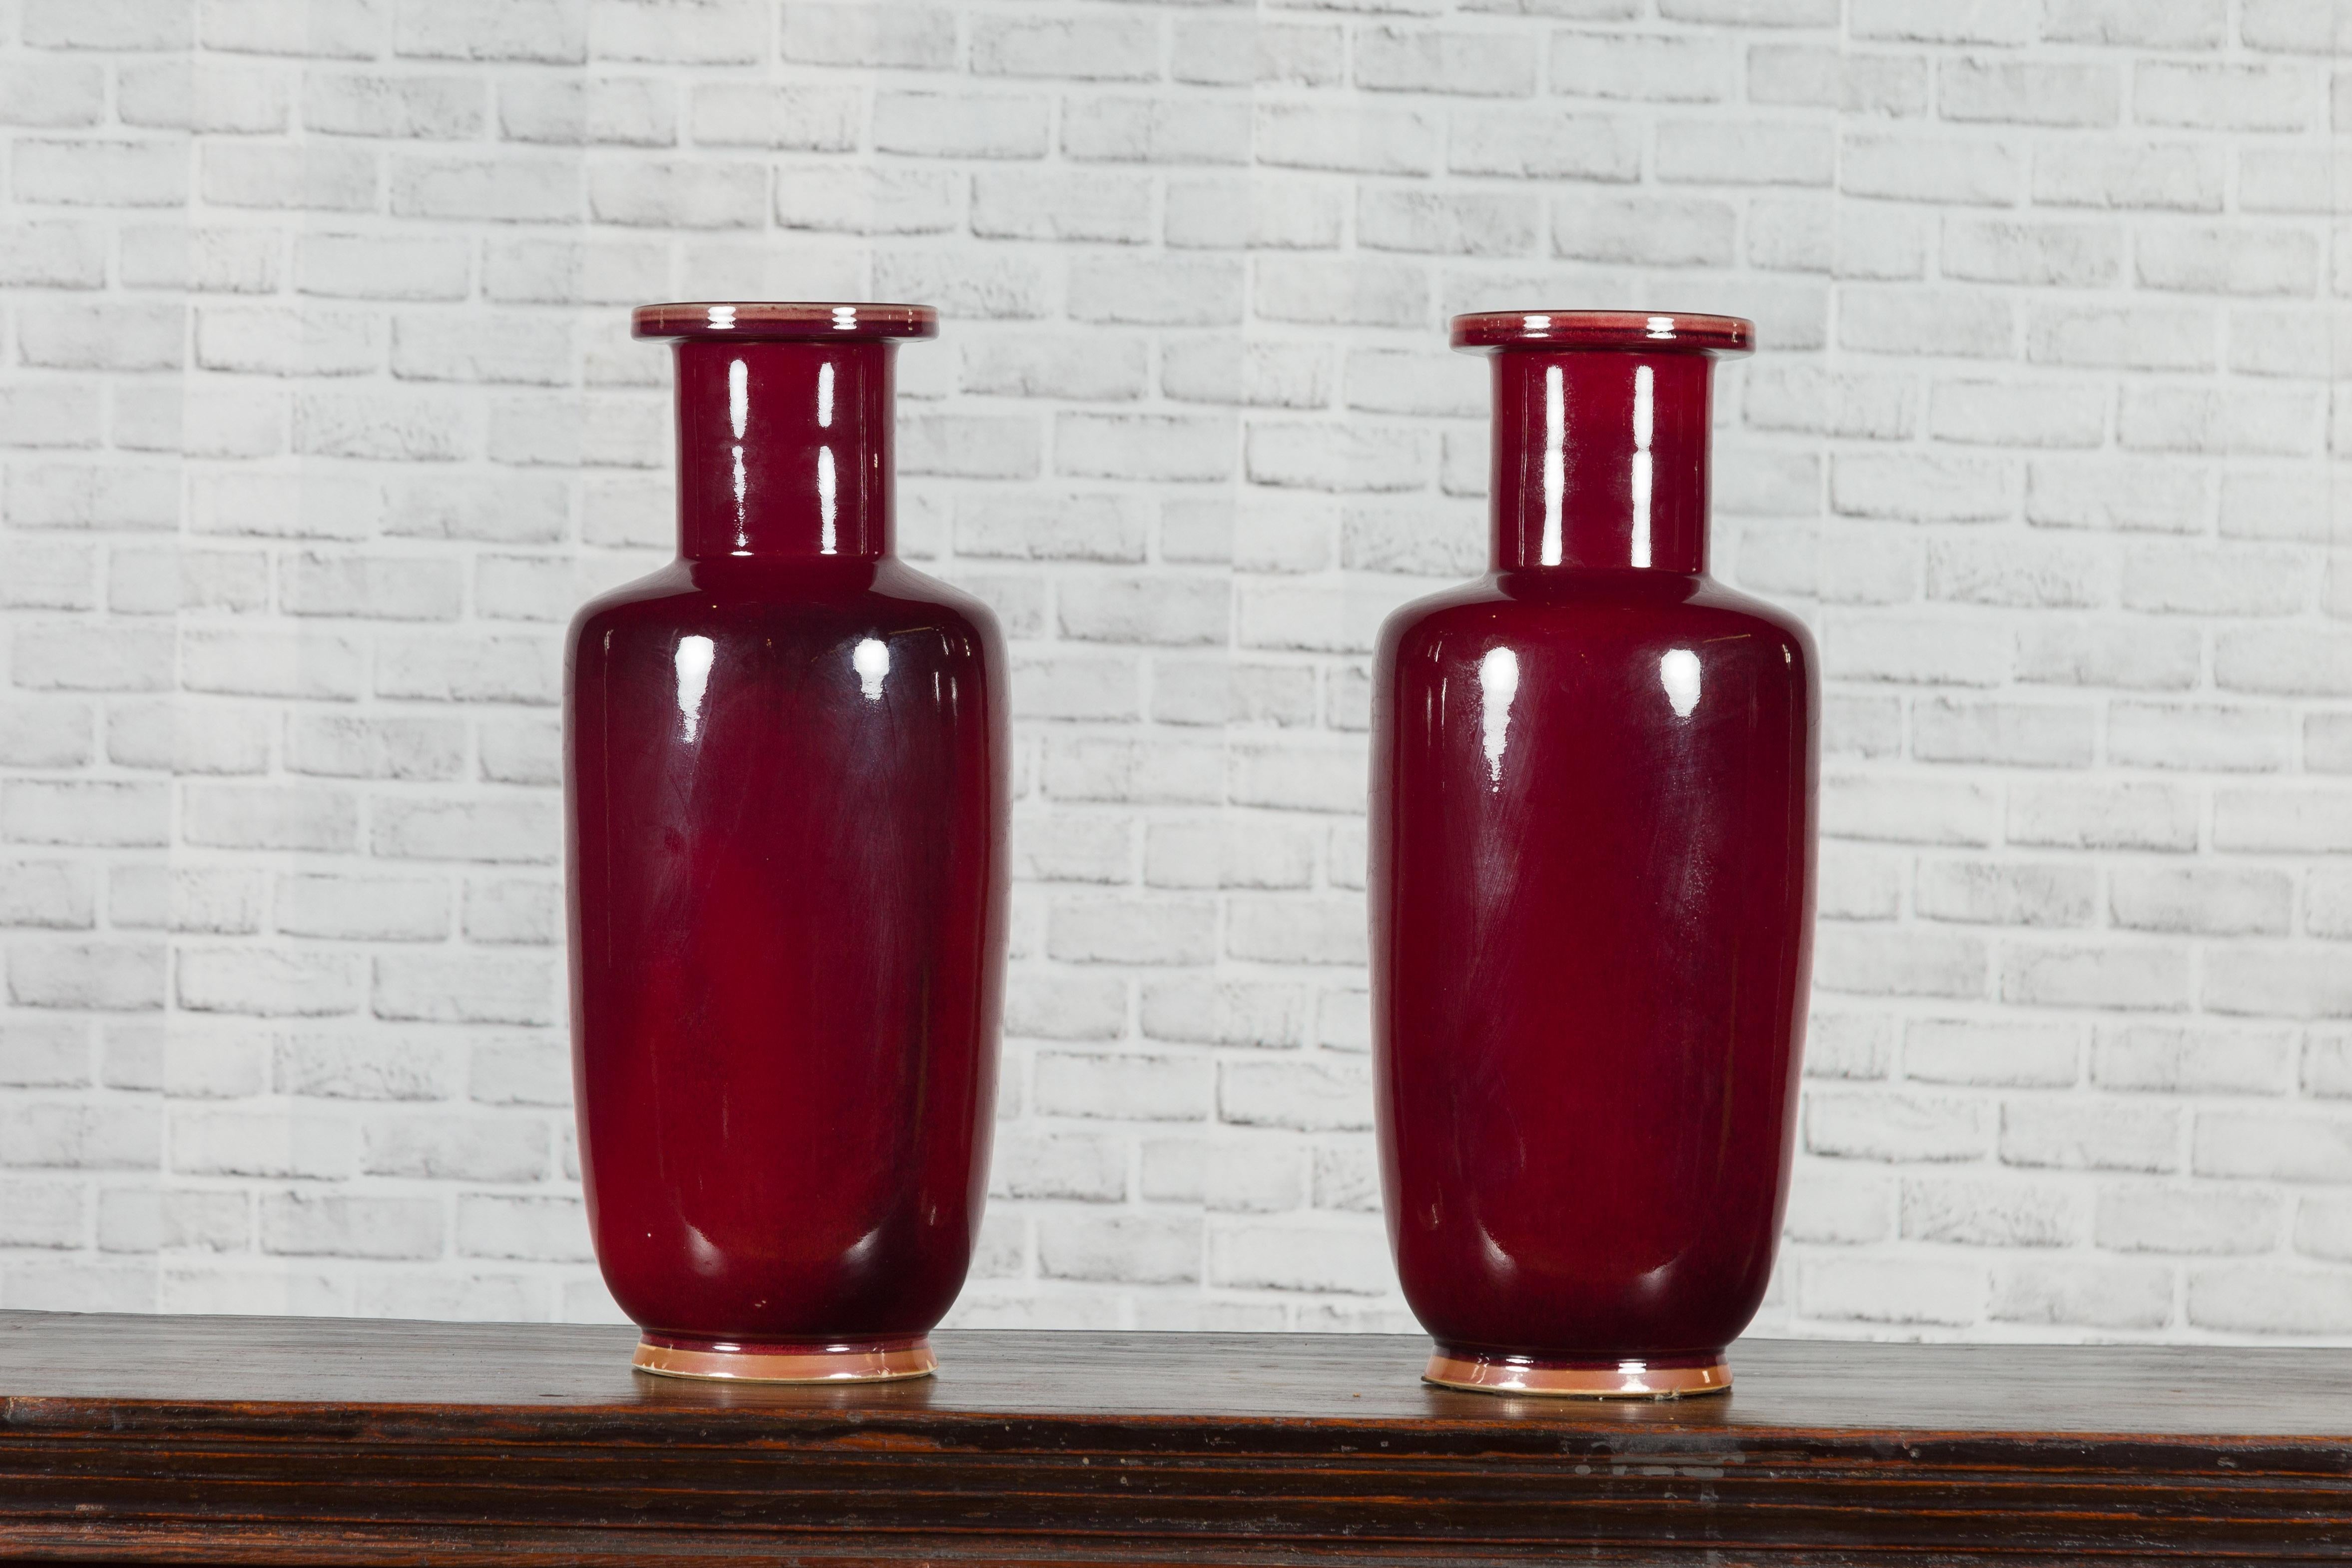 Chinese Contemporary Oxblood Altar Vases with Tall Necks, Sold Individually 5